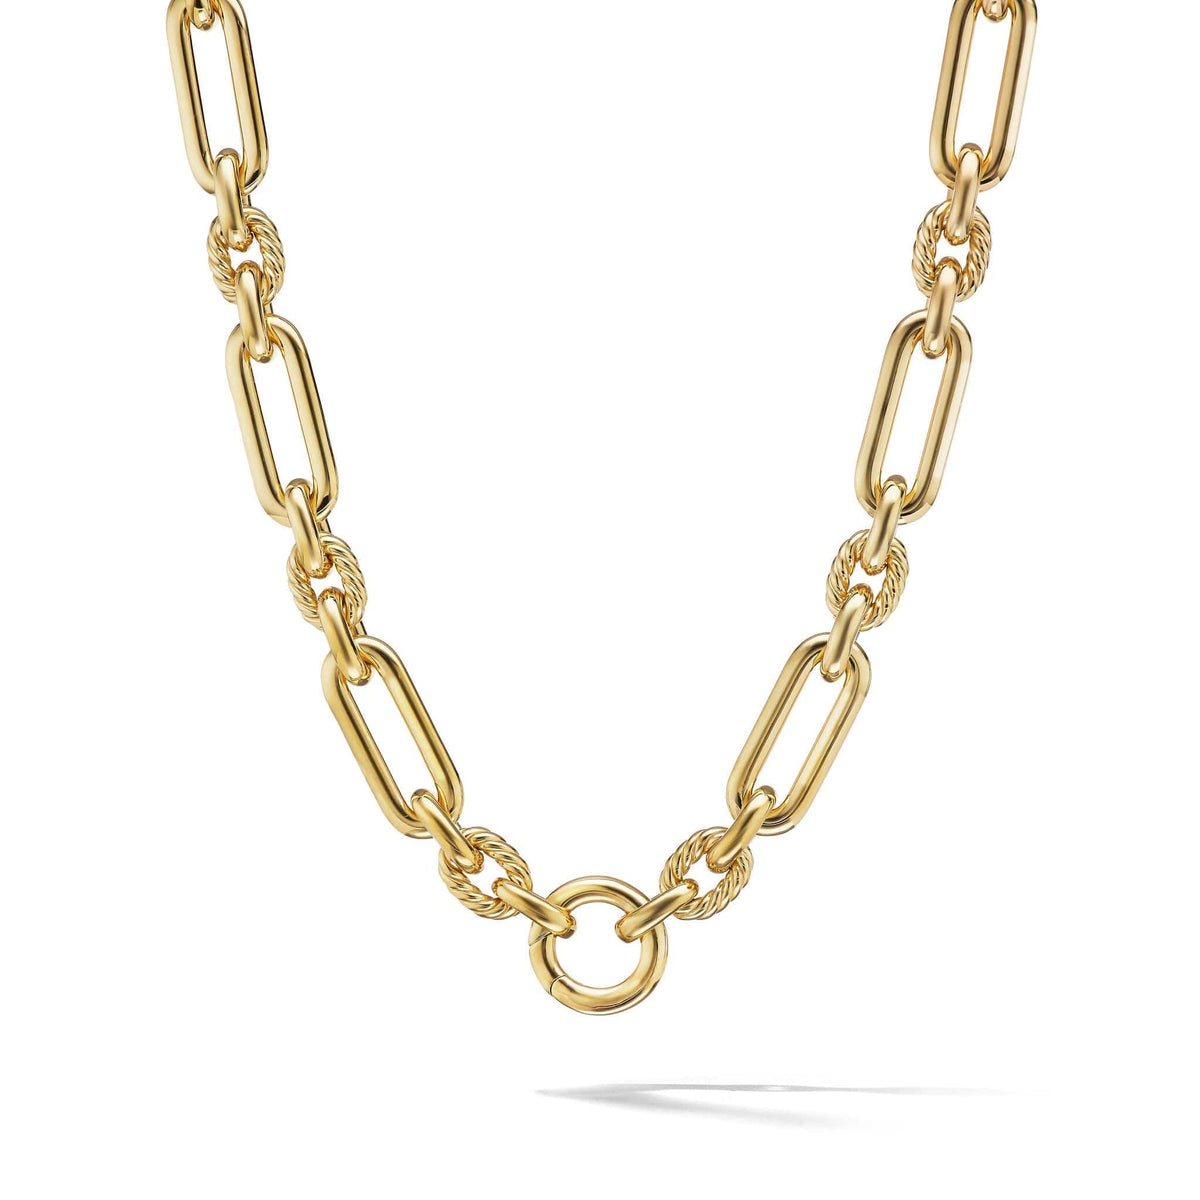 Lexington Chain Necklace in 18K Yellow Gold, Long's Jewelers